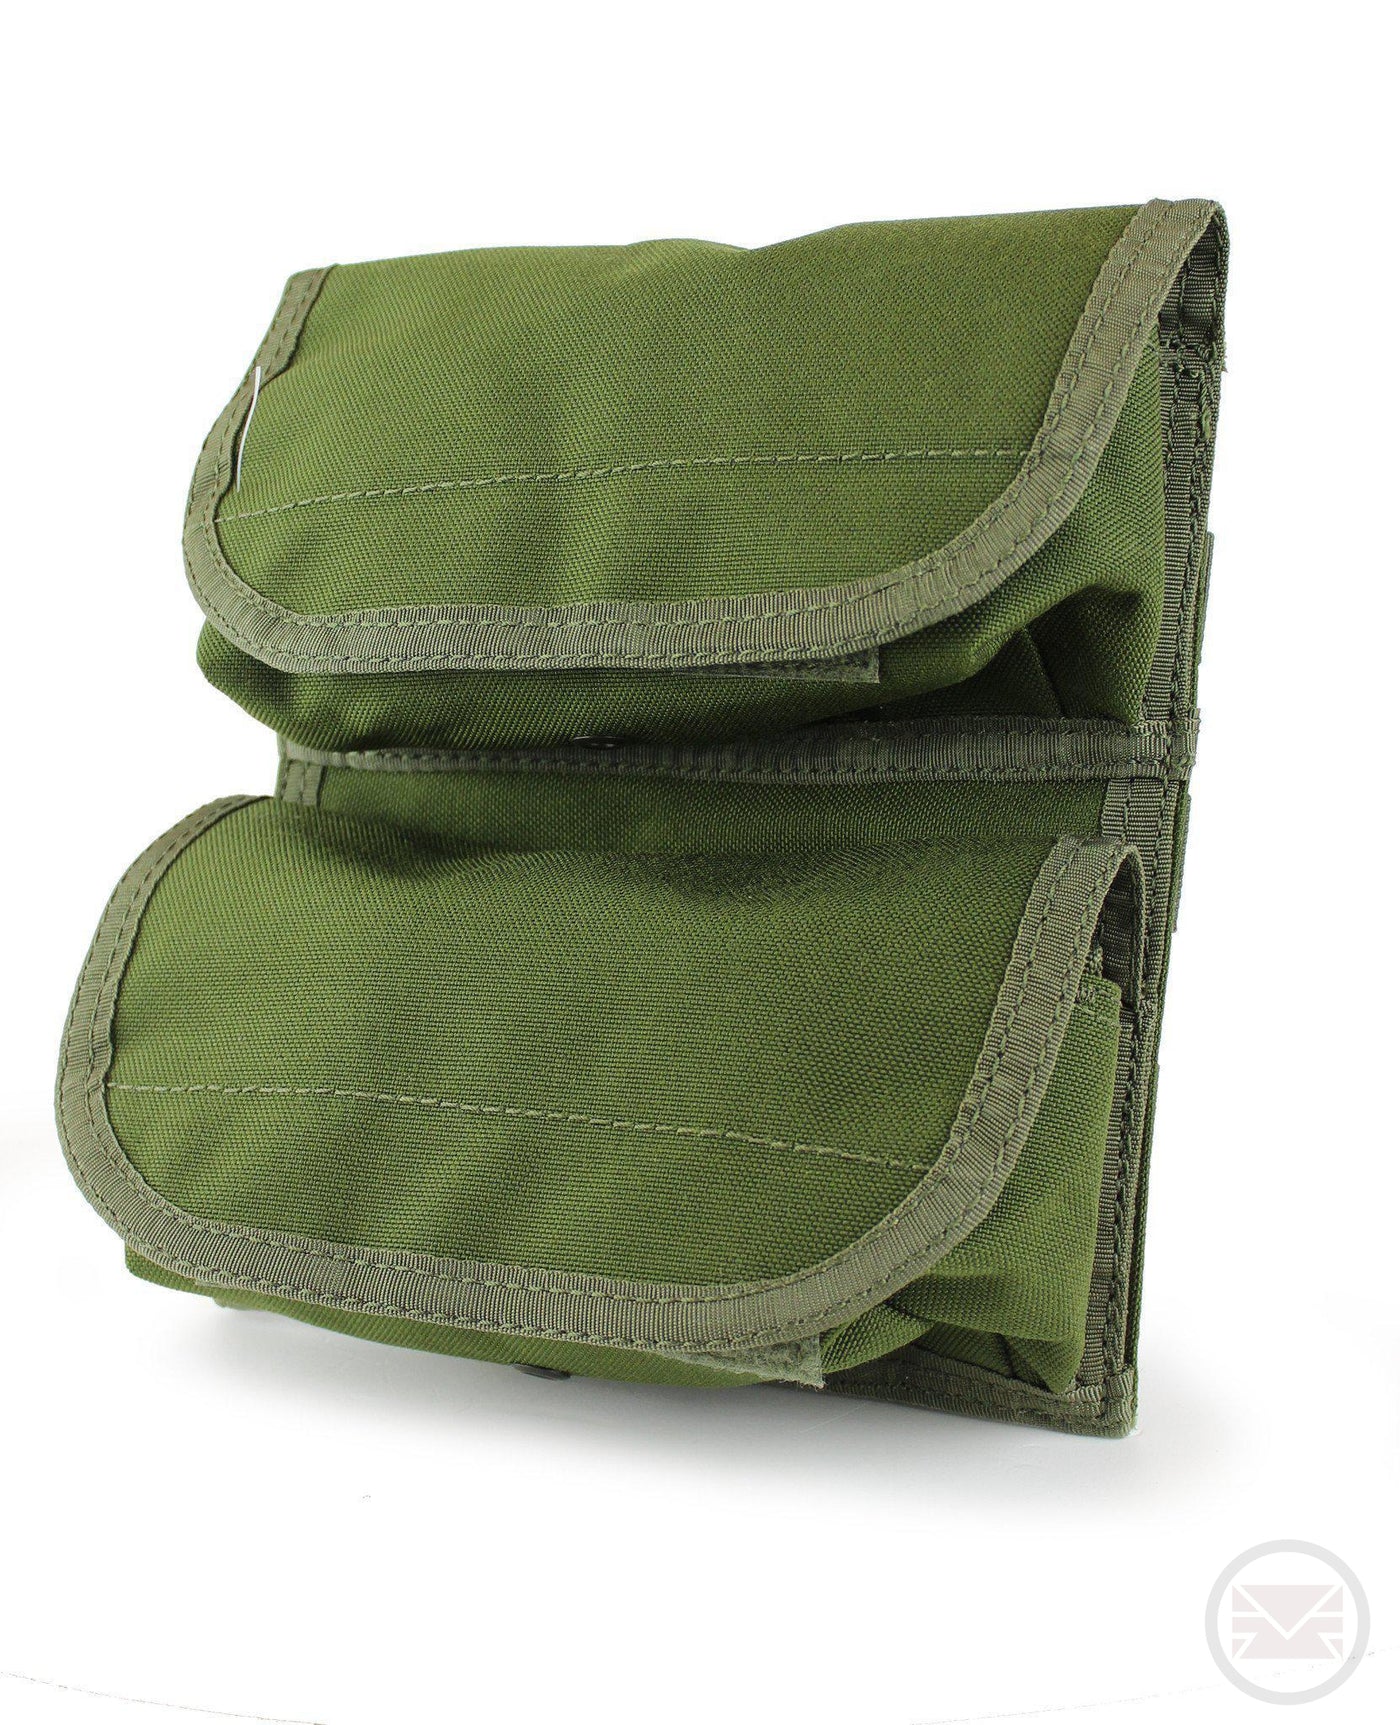 MOLLE Dual Pocket Utility Pouch for Tactical Vest-Modern Combat Sports